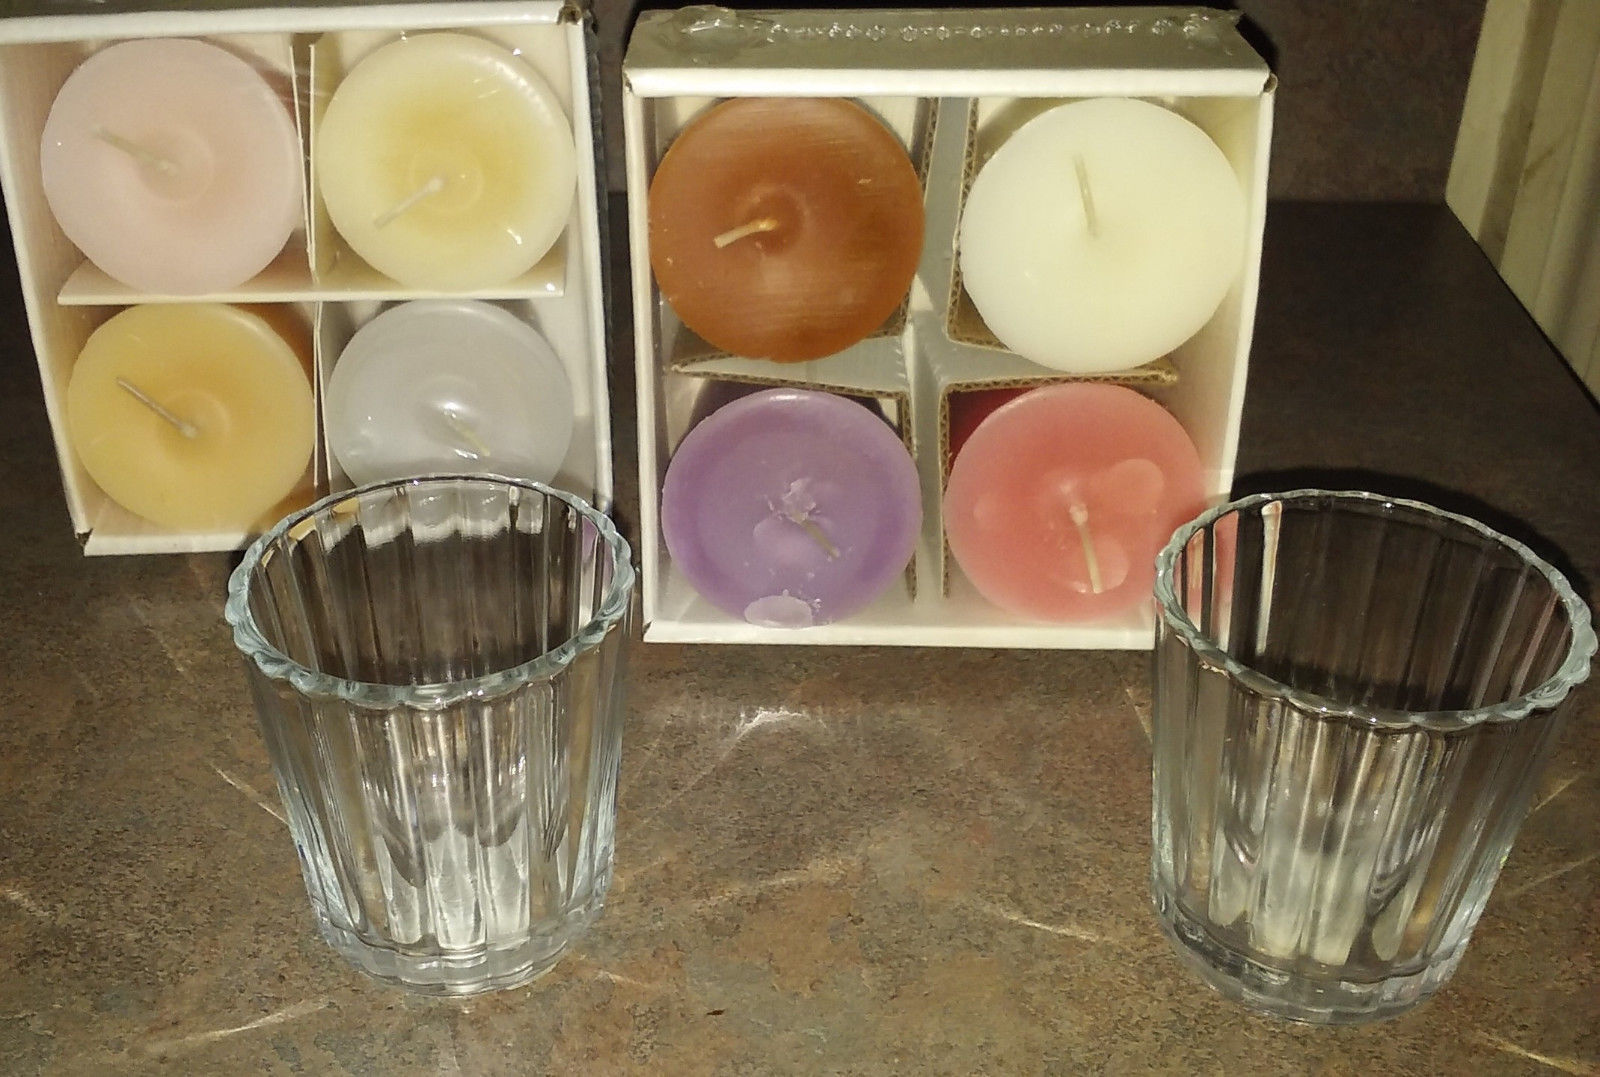 Valerie Parr Hill Votive Candles  Assorted Scents Glass holders - $19.99